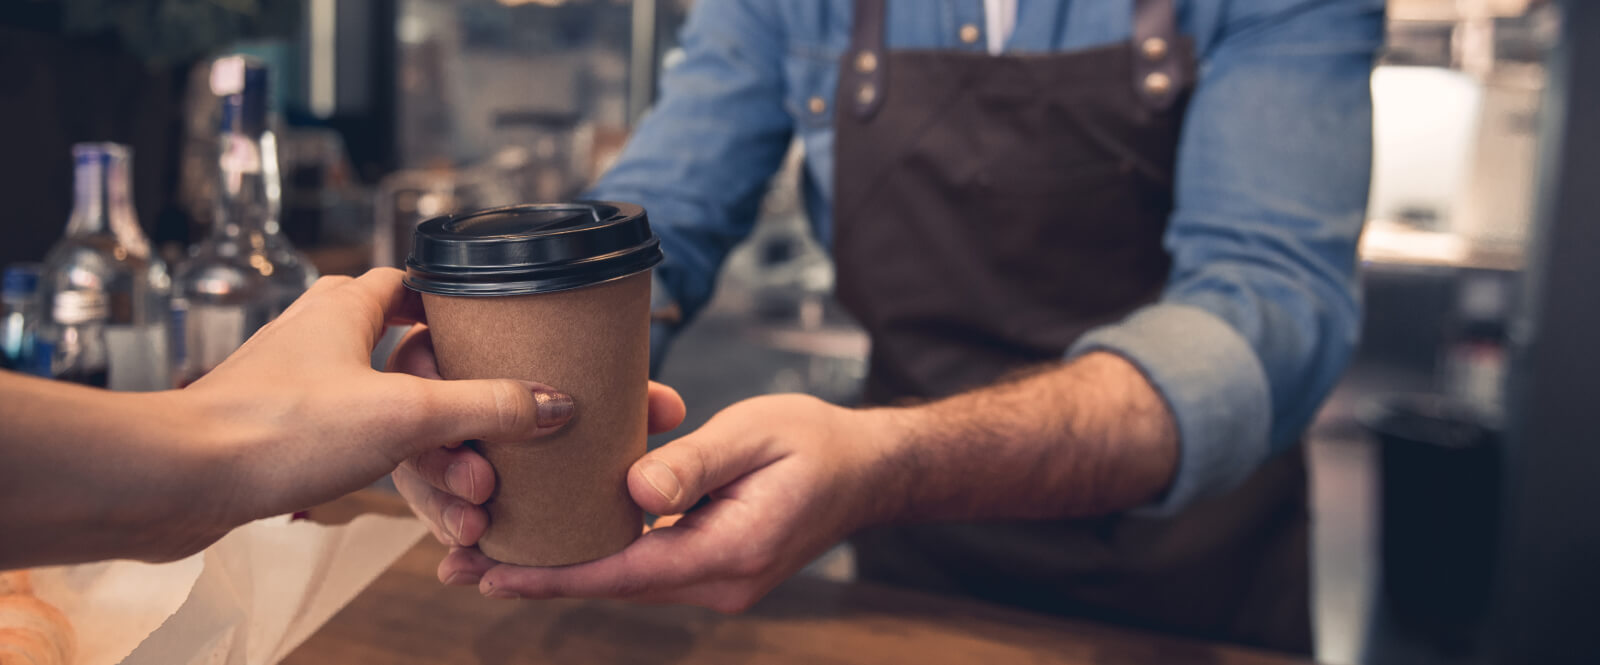 Close-up of a man's hands passing a paper coffee cup to someone